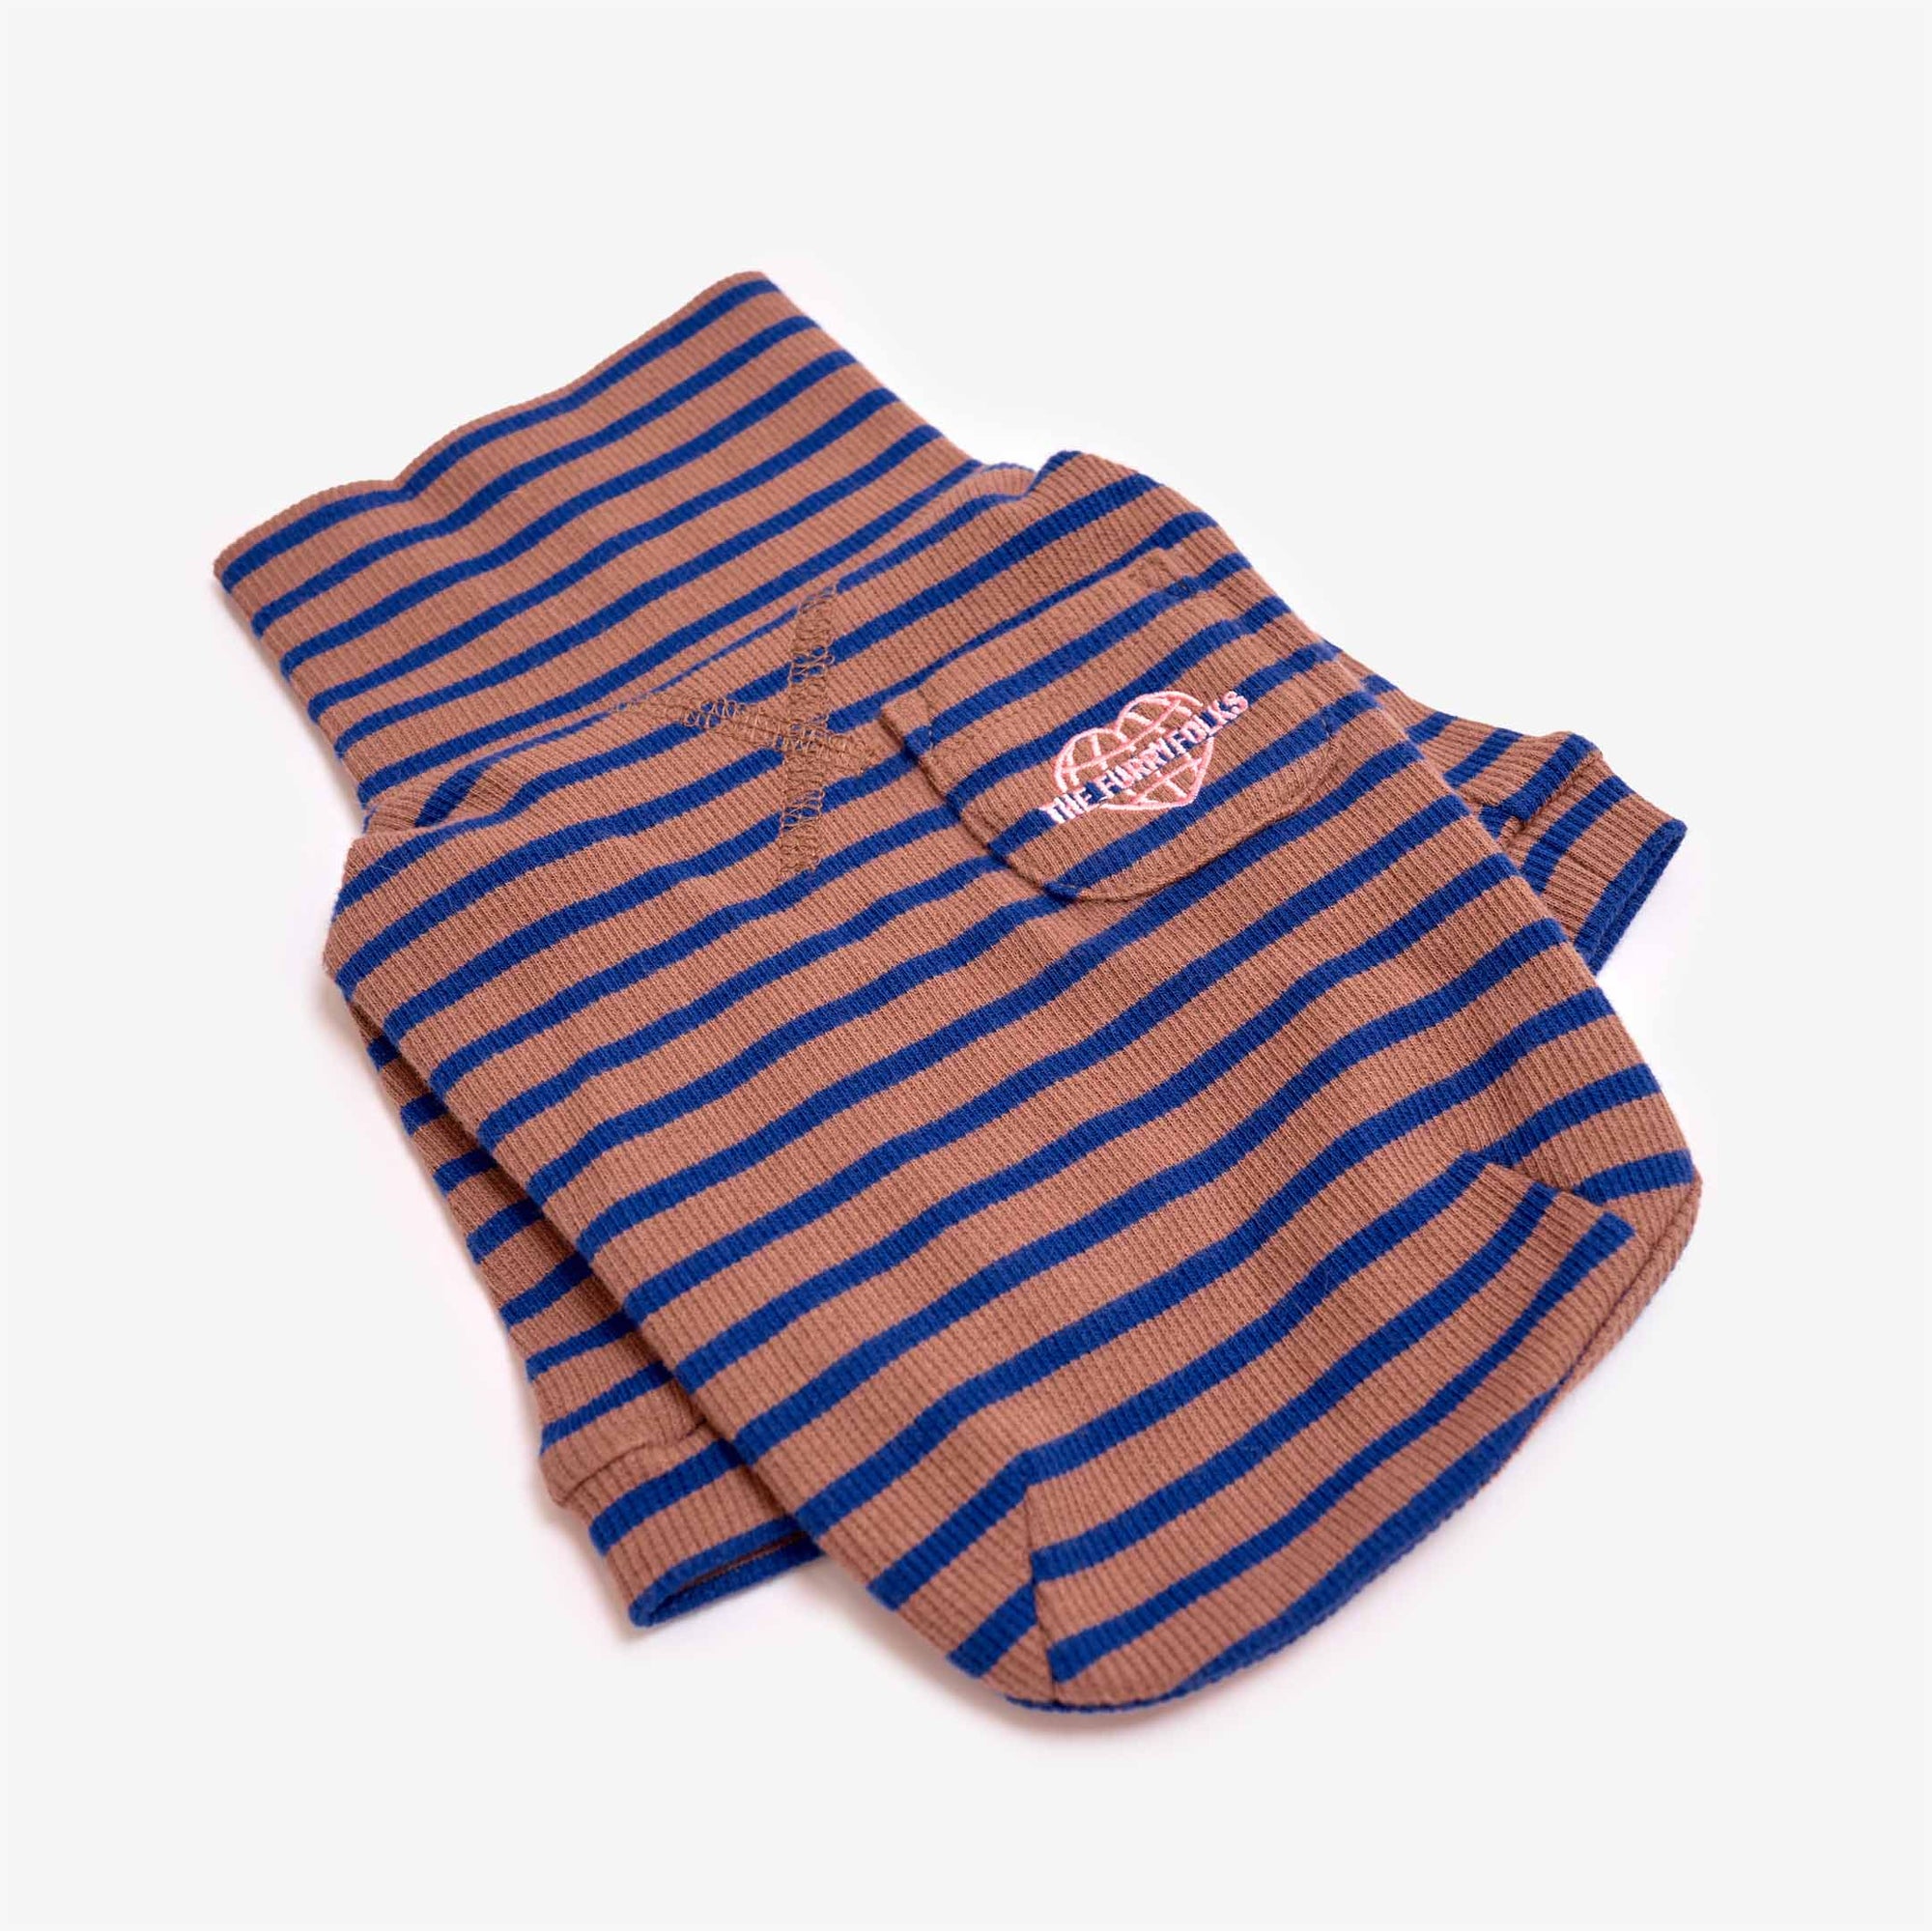 Cobalt and Brown striped dog shirt with heart logo, designed for a stylish and snug pet fit.